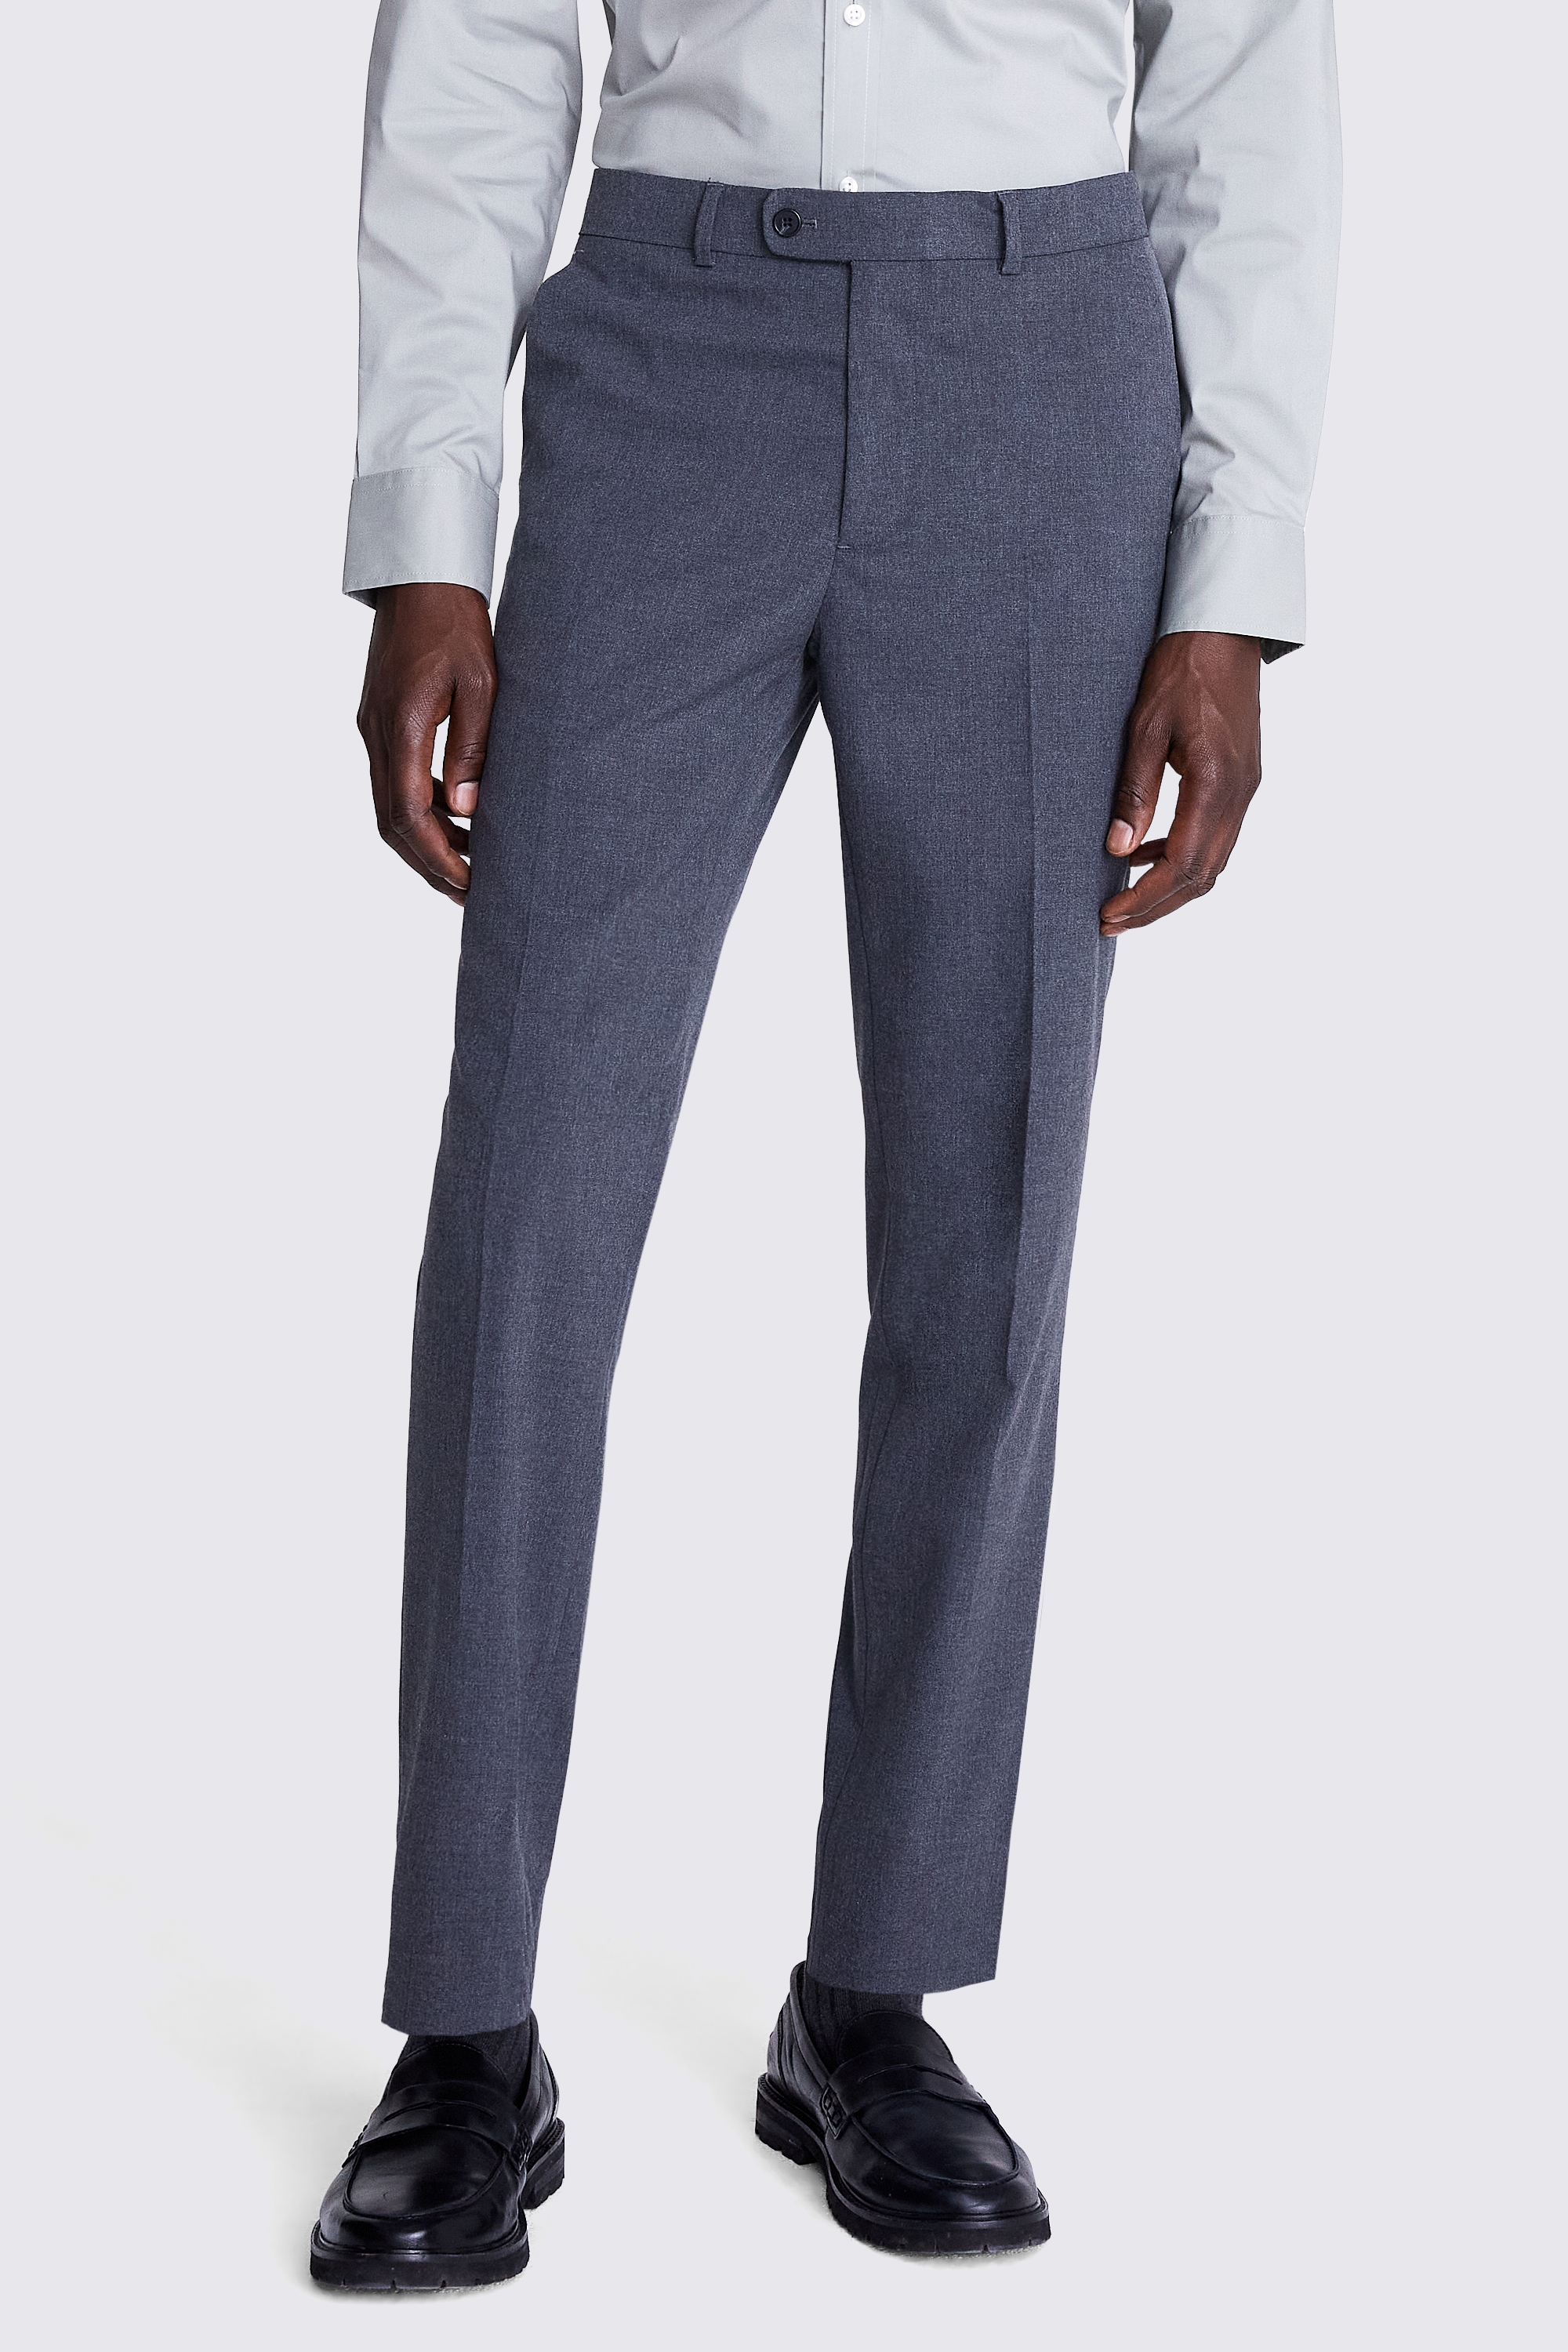 Tailored Fit Grey Trousers | Buy Online at Moss